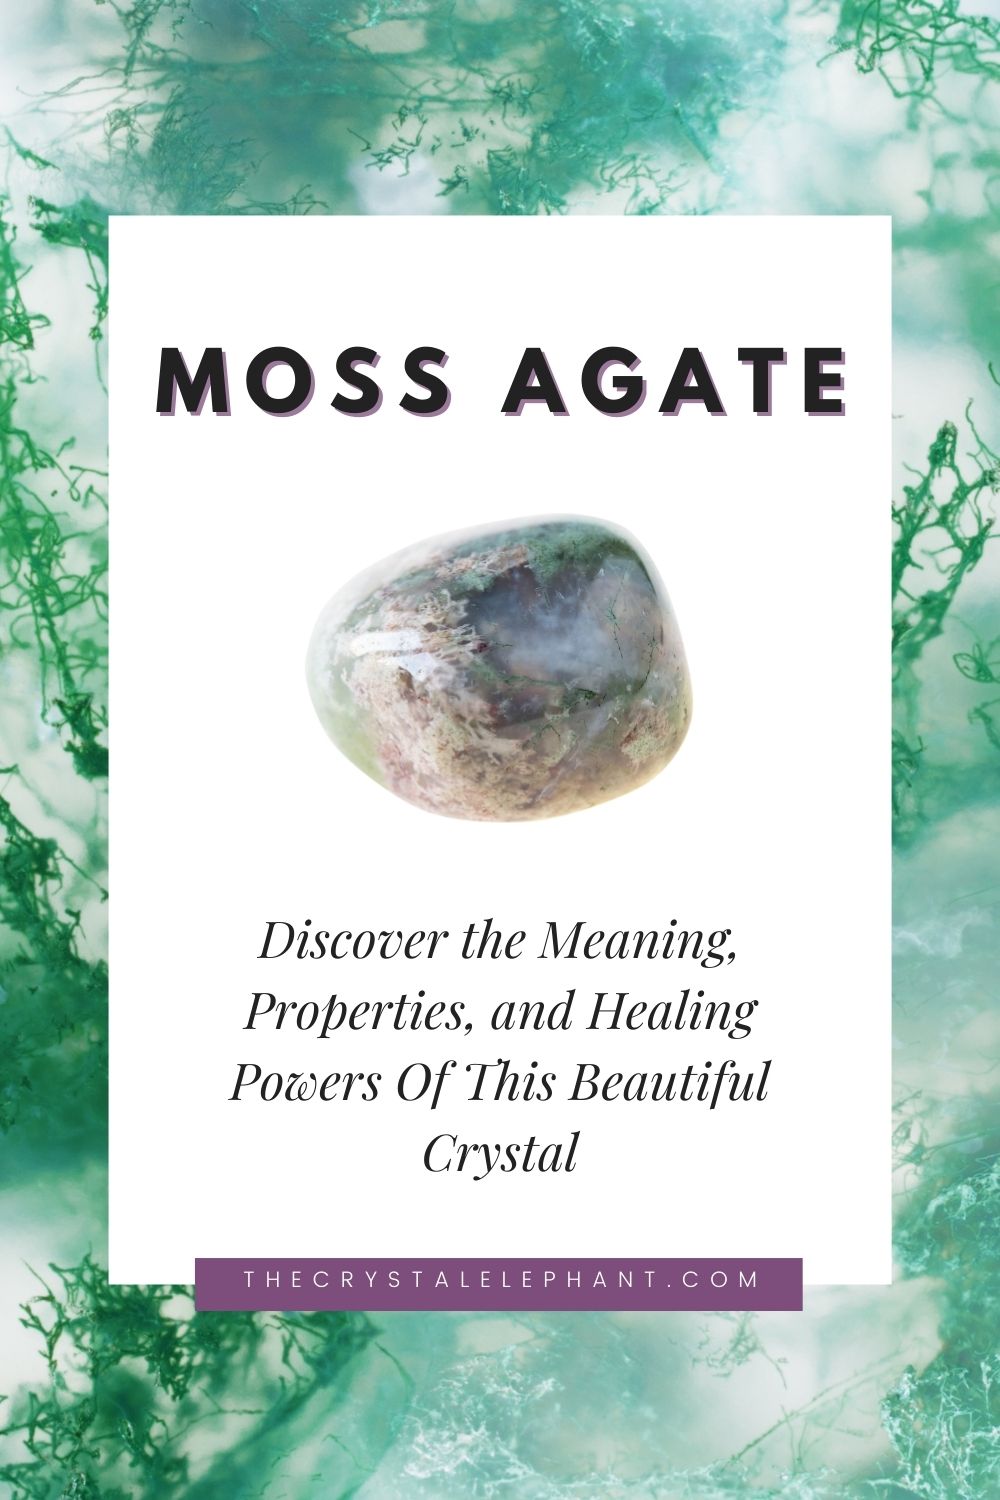 Moss Agate Meaning and healing properties